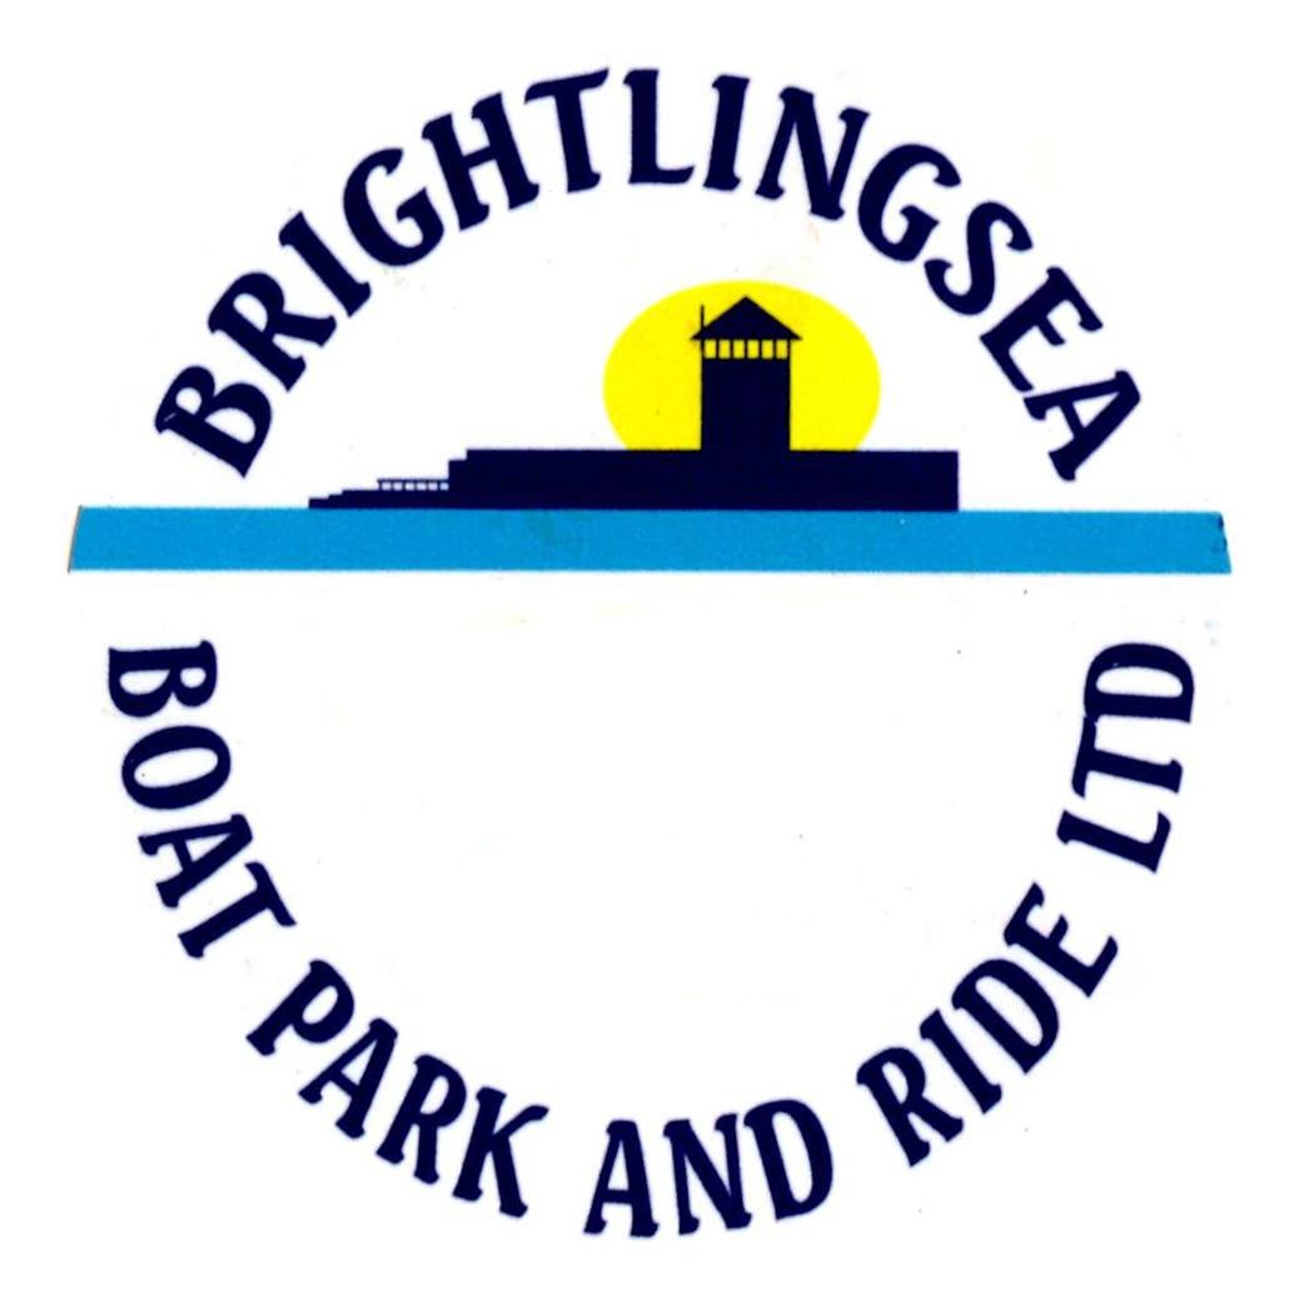 Brightlingsea Boat Park and Ride